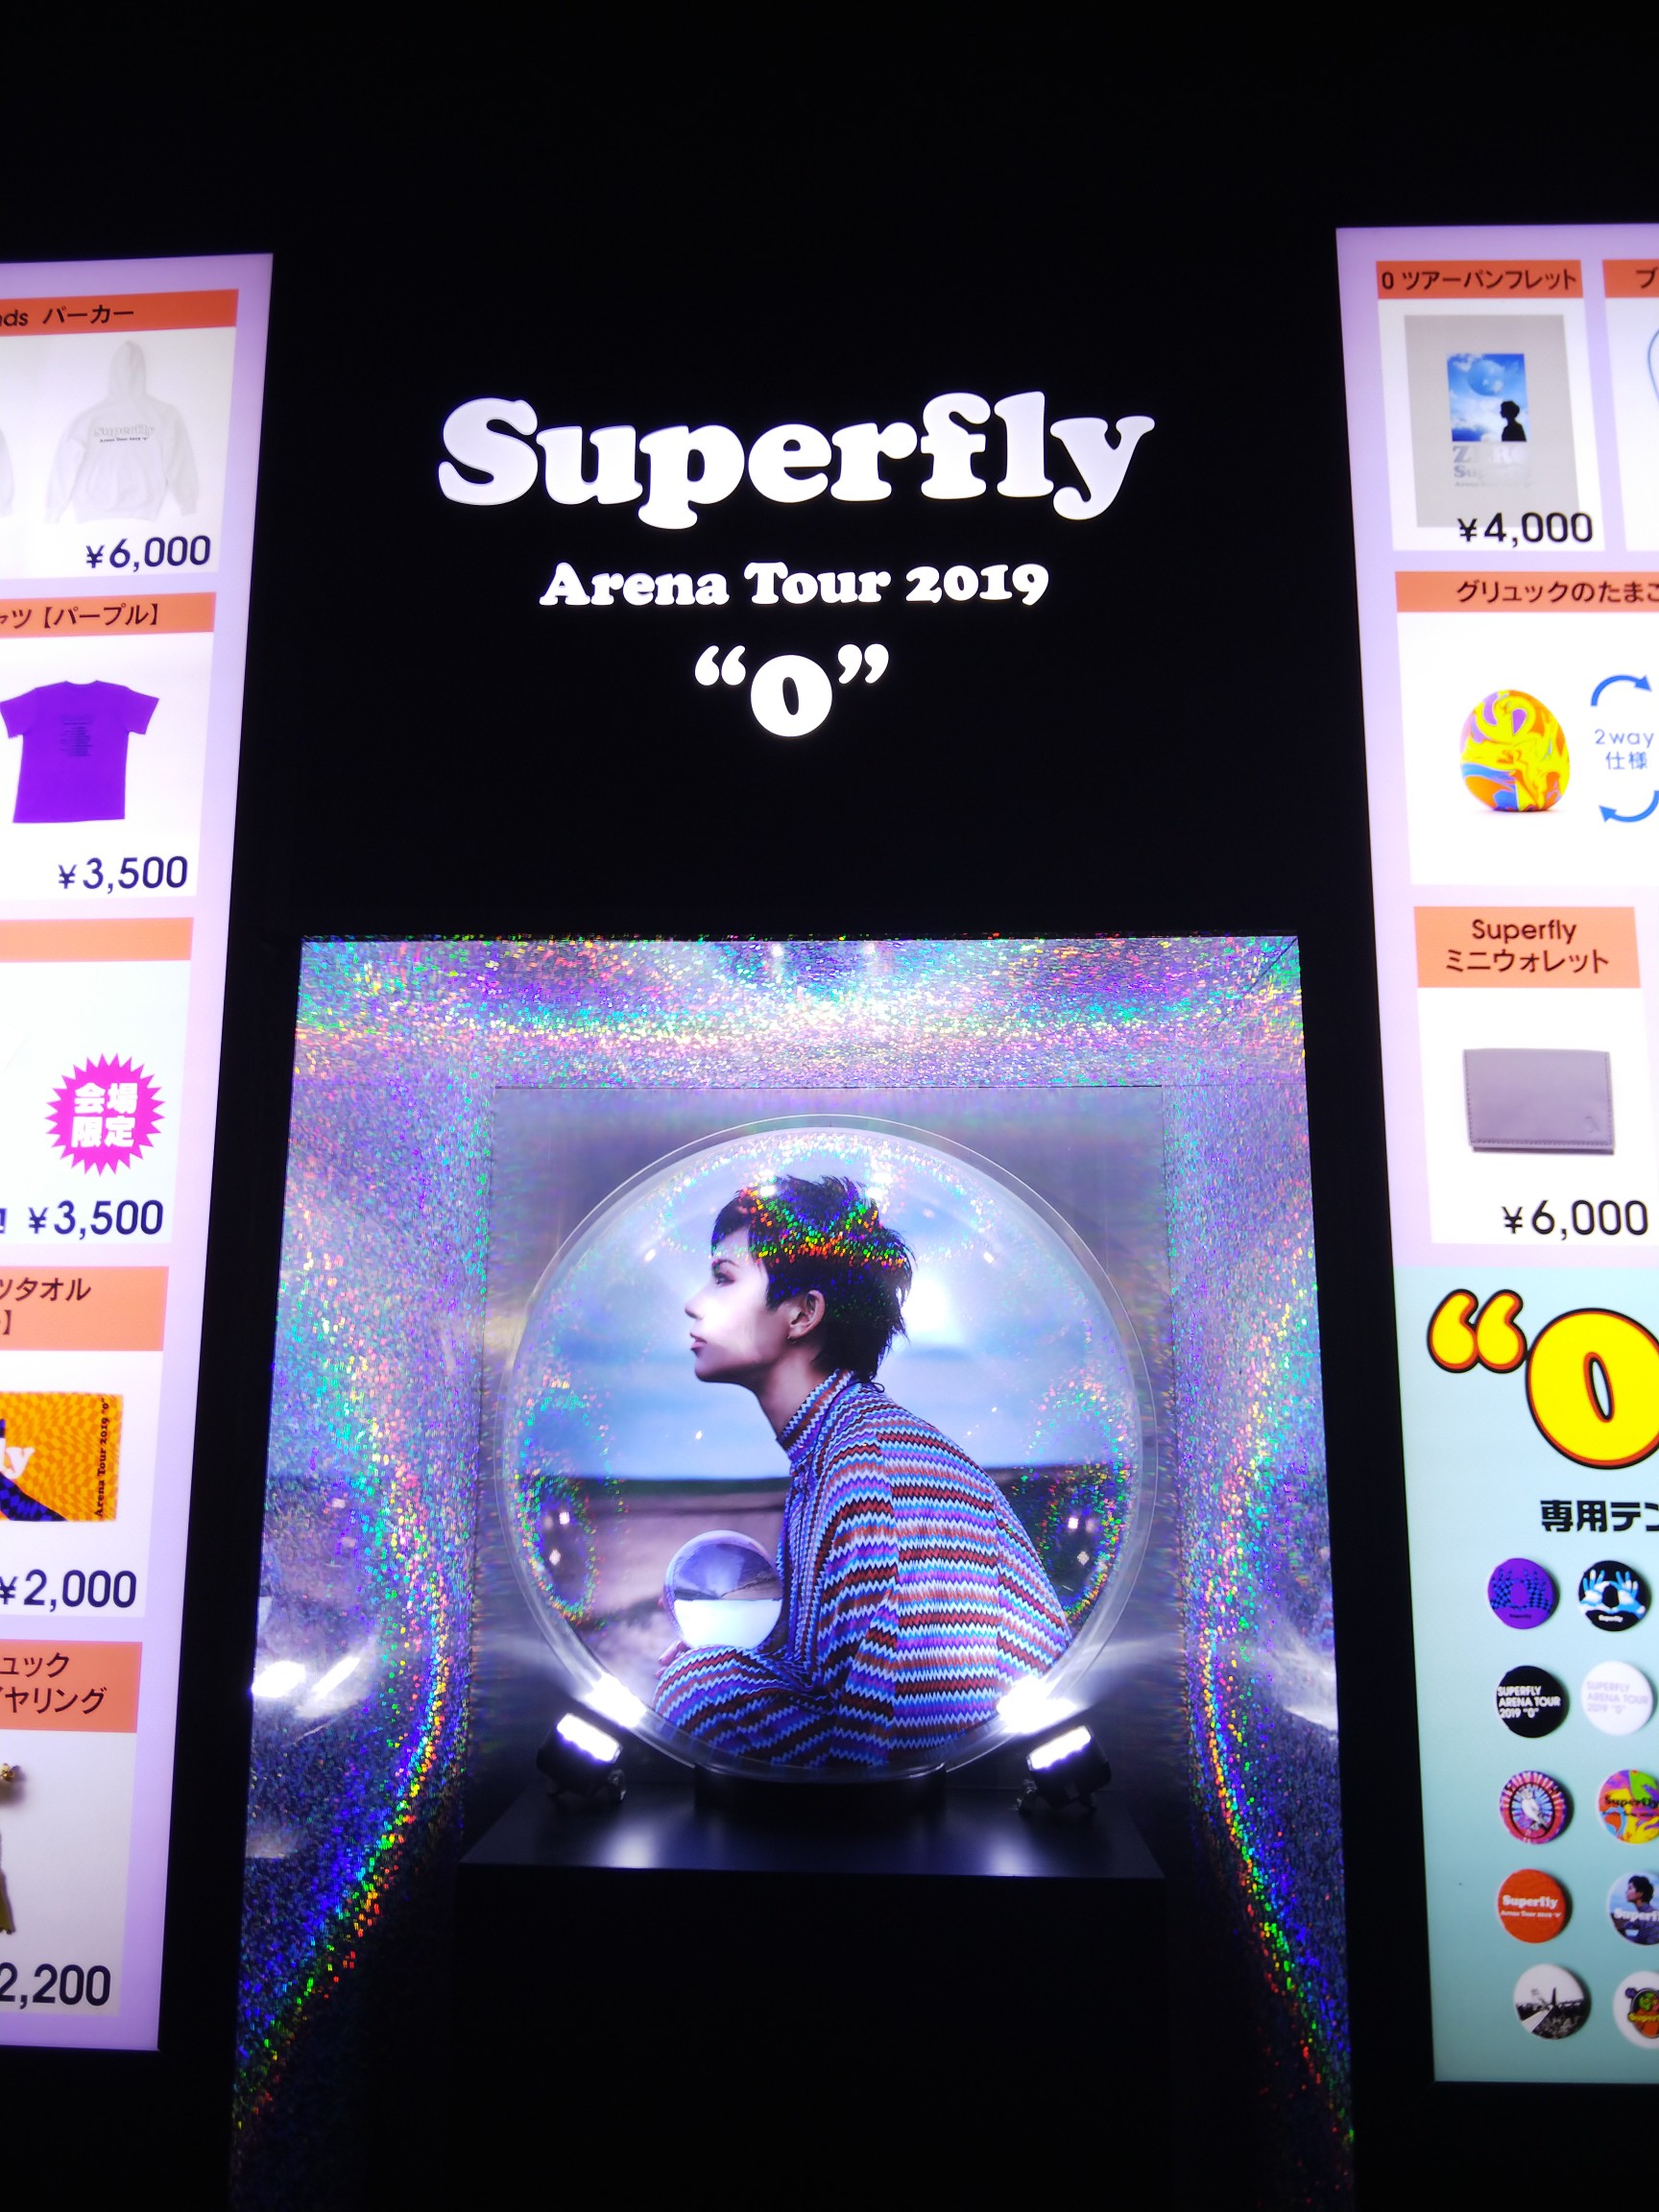 Superfly Arena Tour 2019